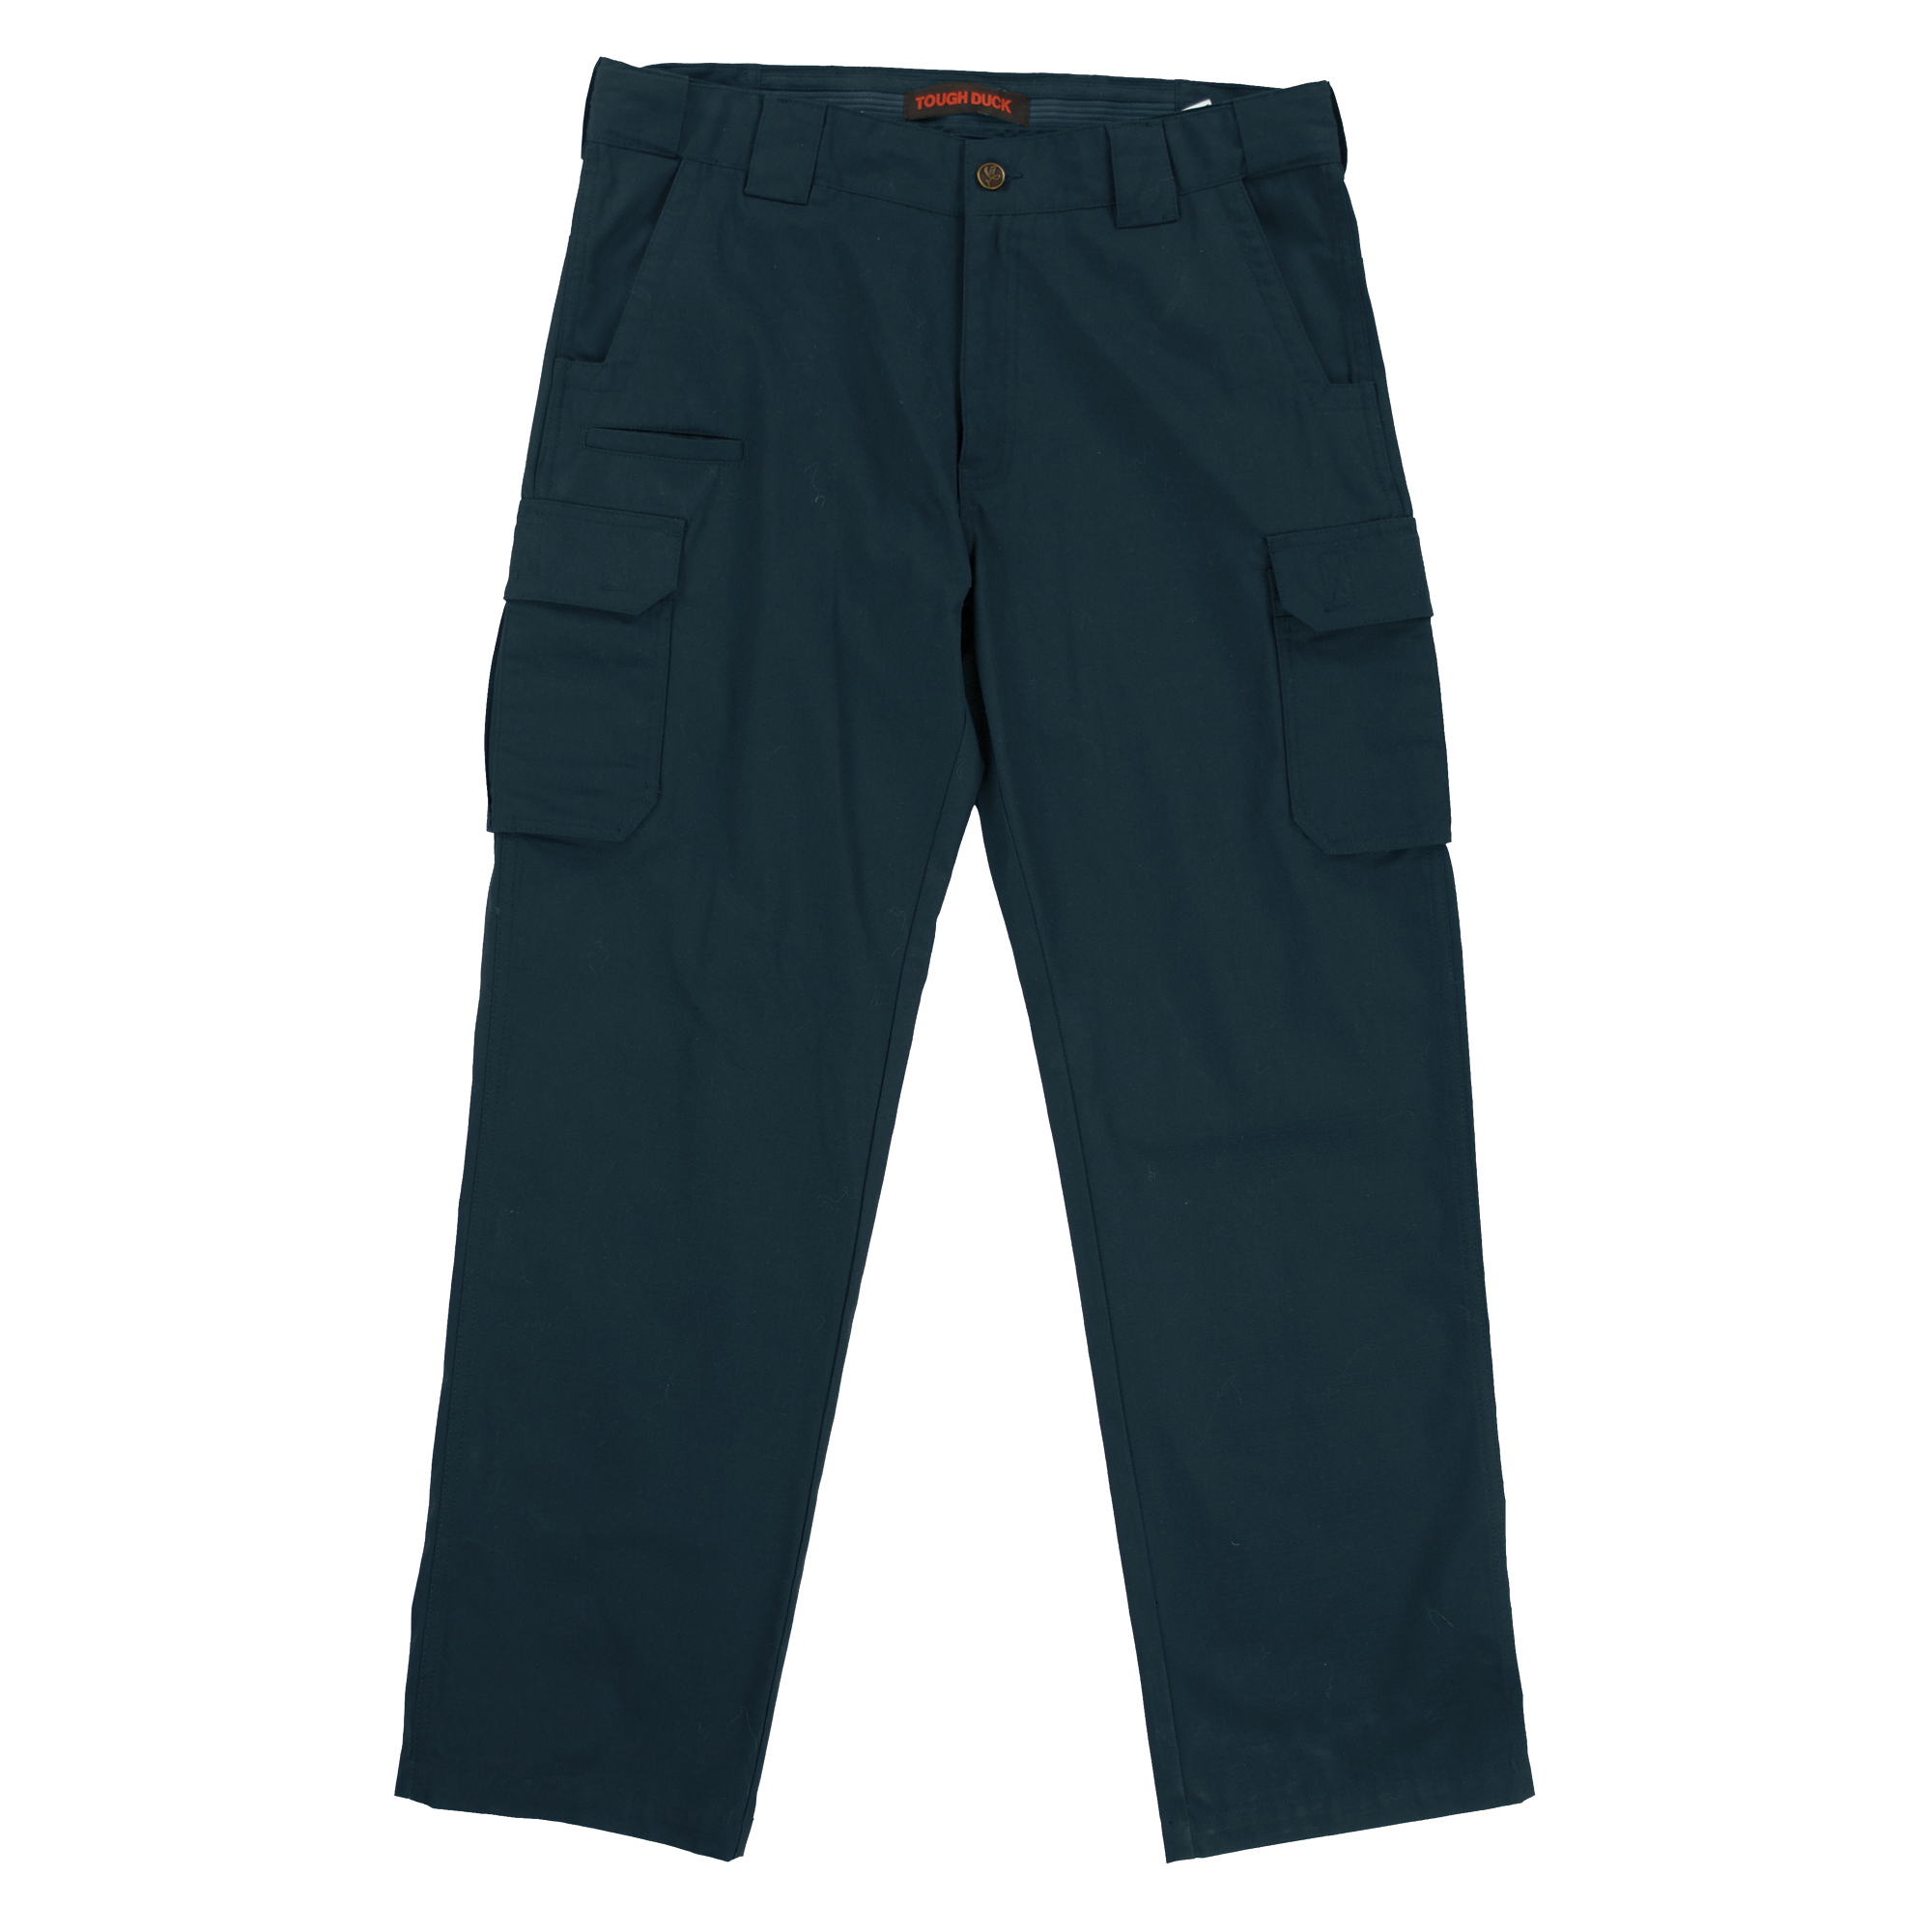 Tough Duck, Ripstop Cargo Pant, Waist 36 in, Inseam 32 in, Color Navy, Model WP111